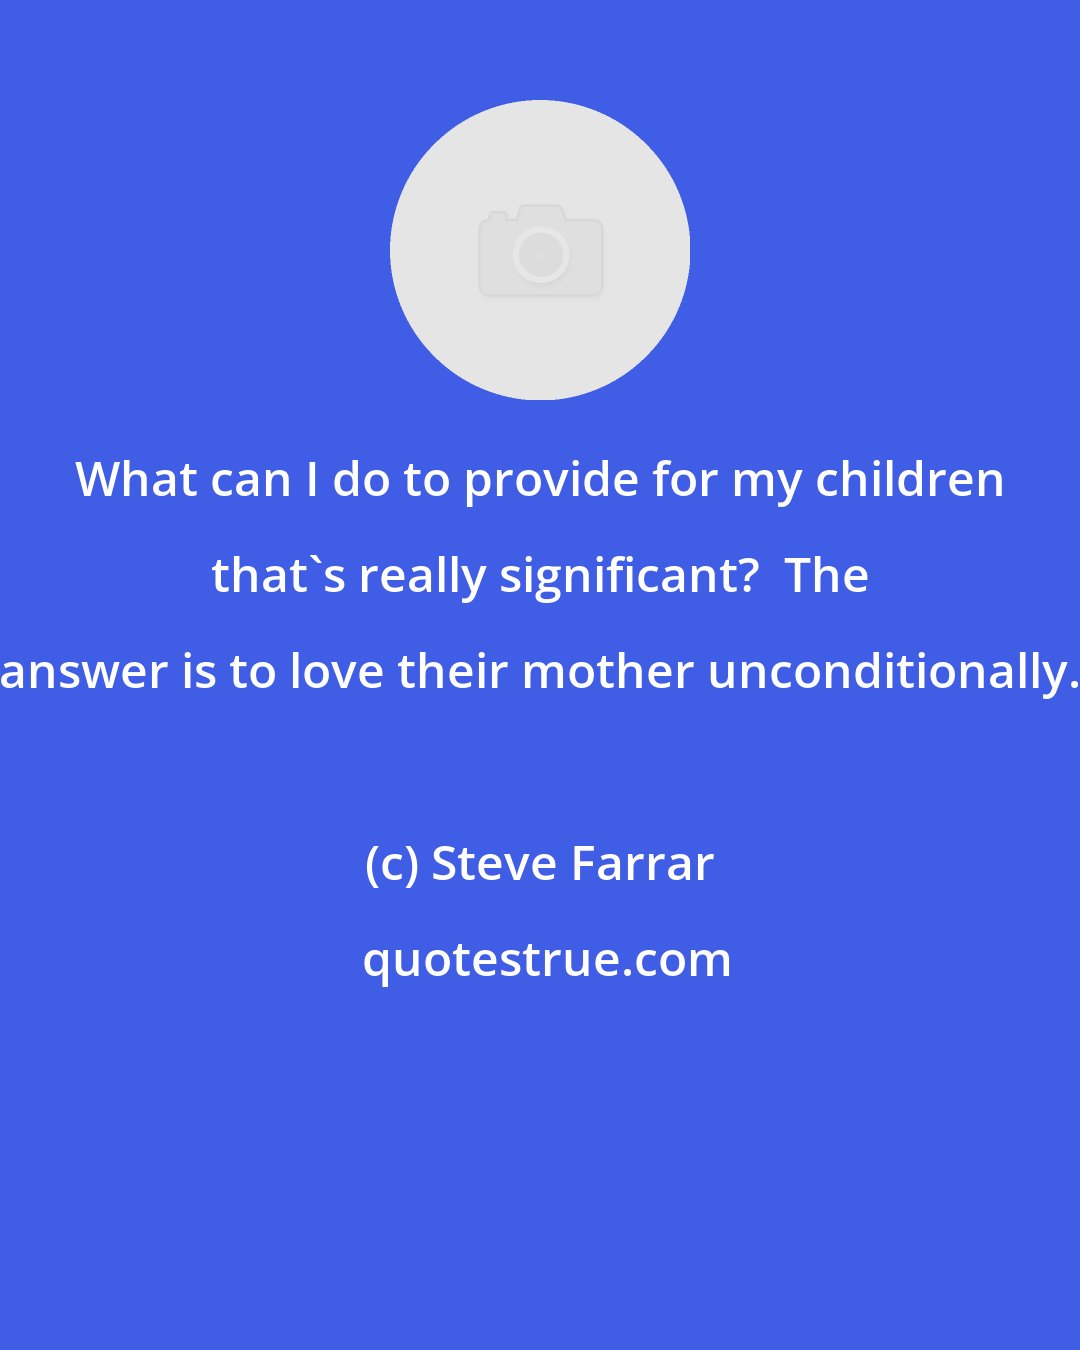 Steve Farrar: What can I do to provide for my children that's really significant?  The answer is to love their mother unconditionally.